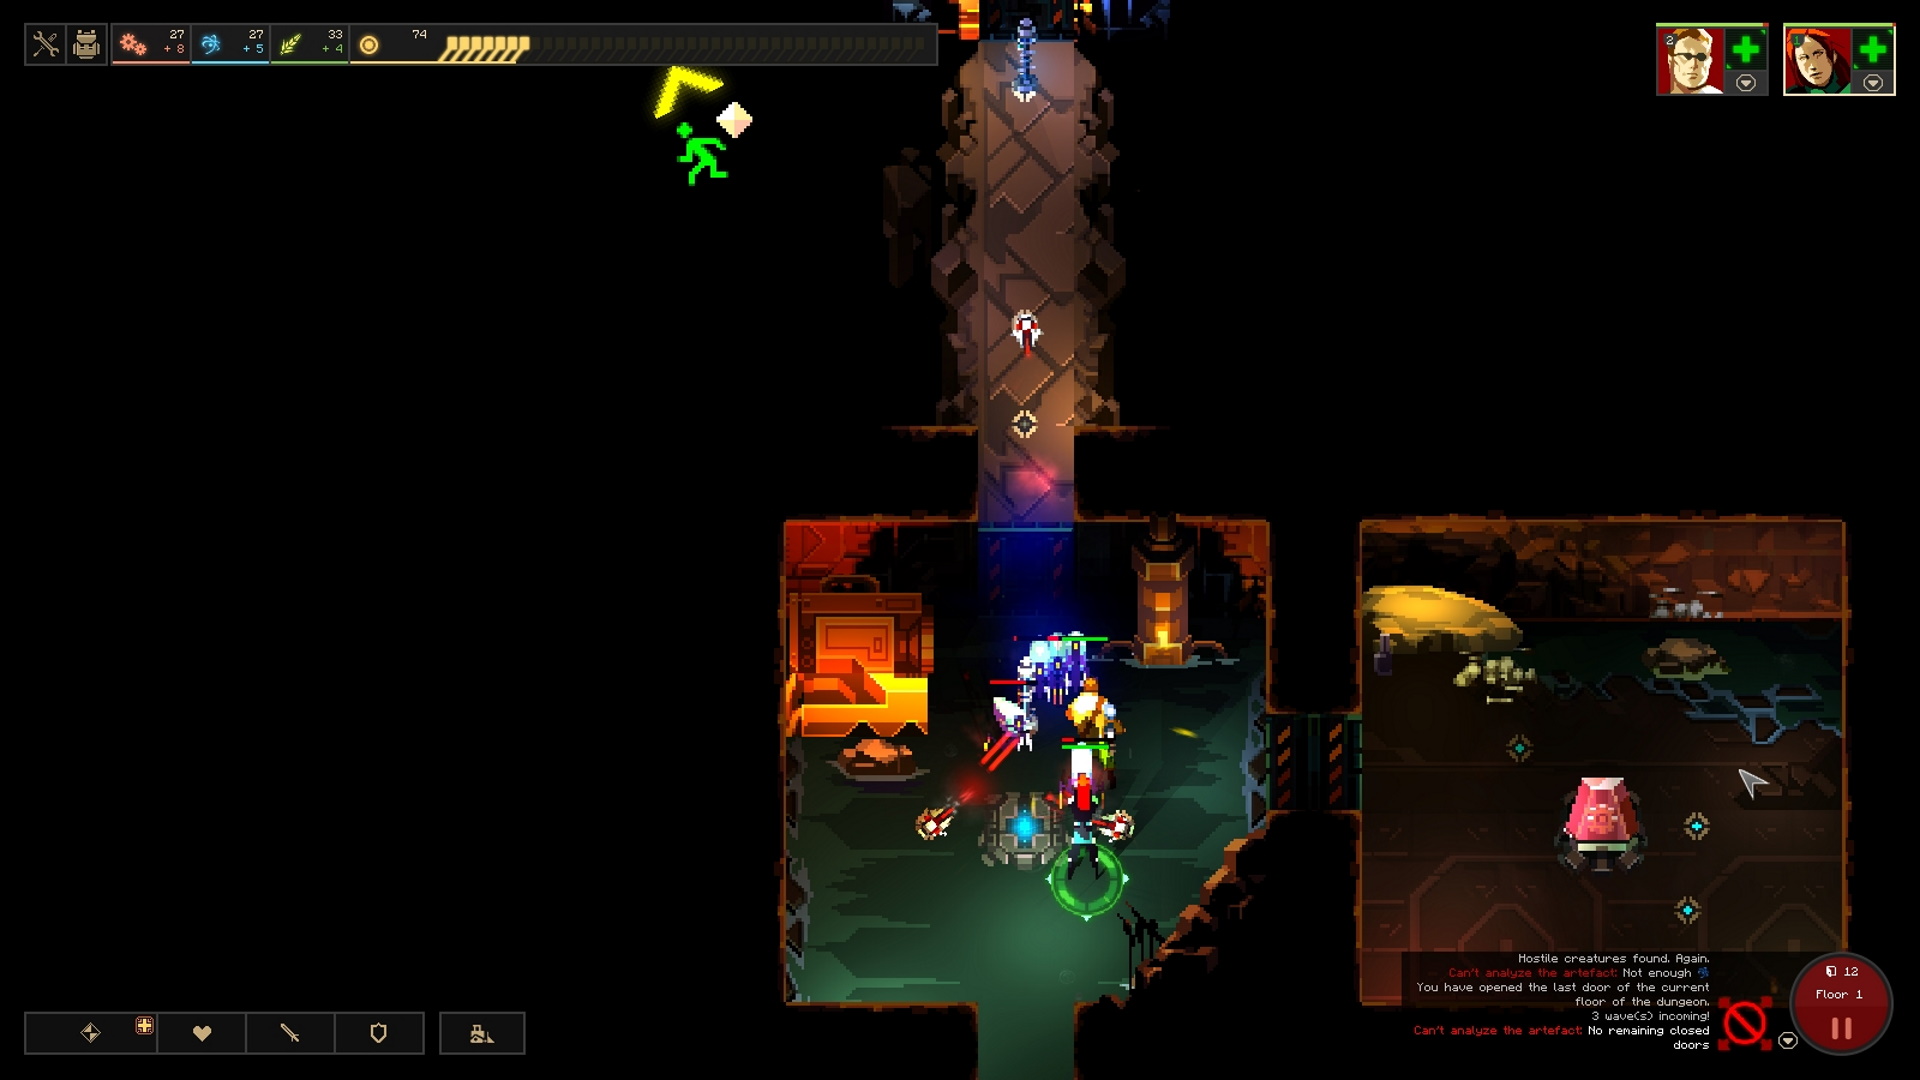 Economic games: heroes face enemies in a dungeon while turrets help